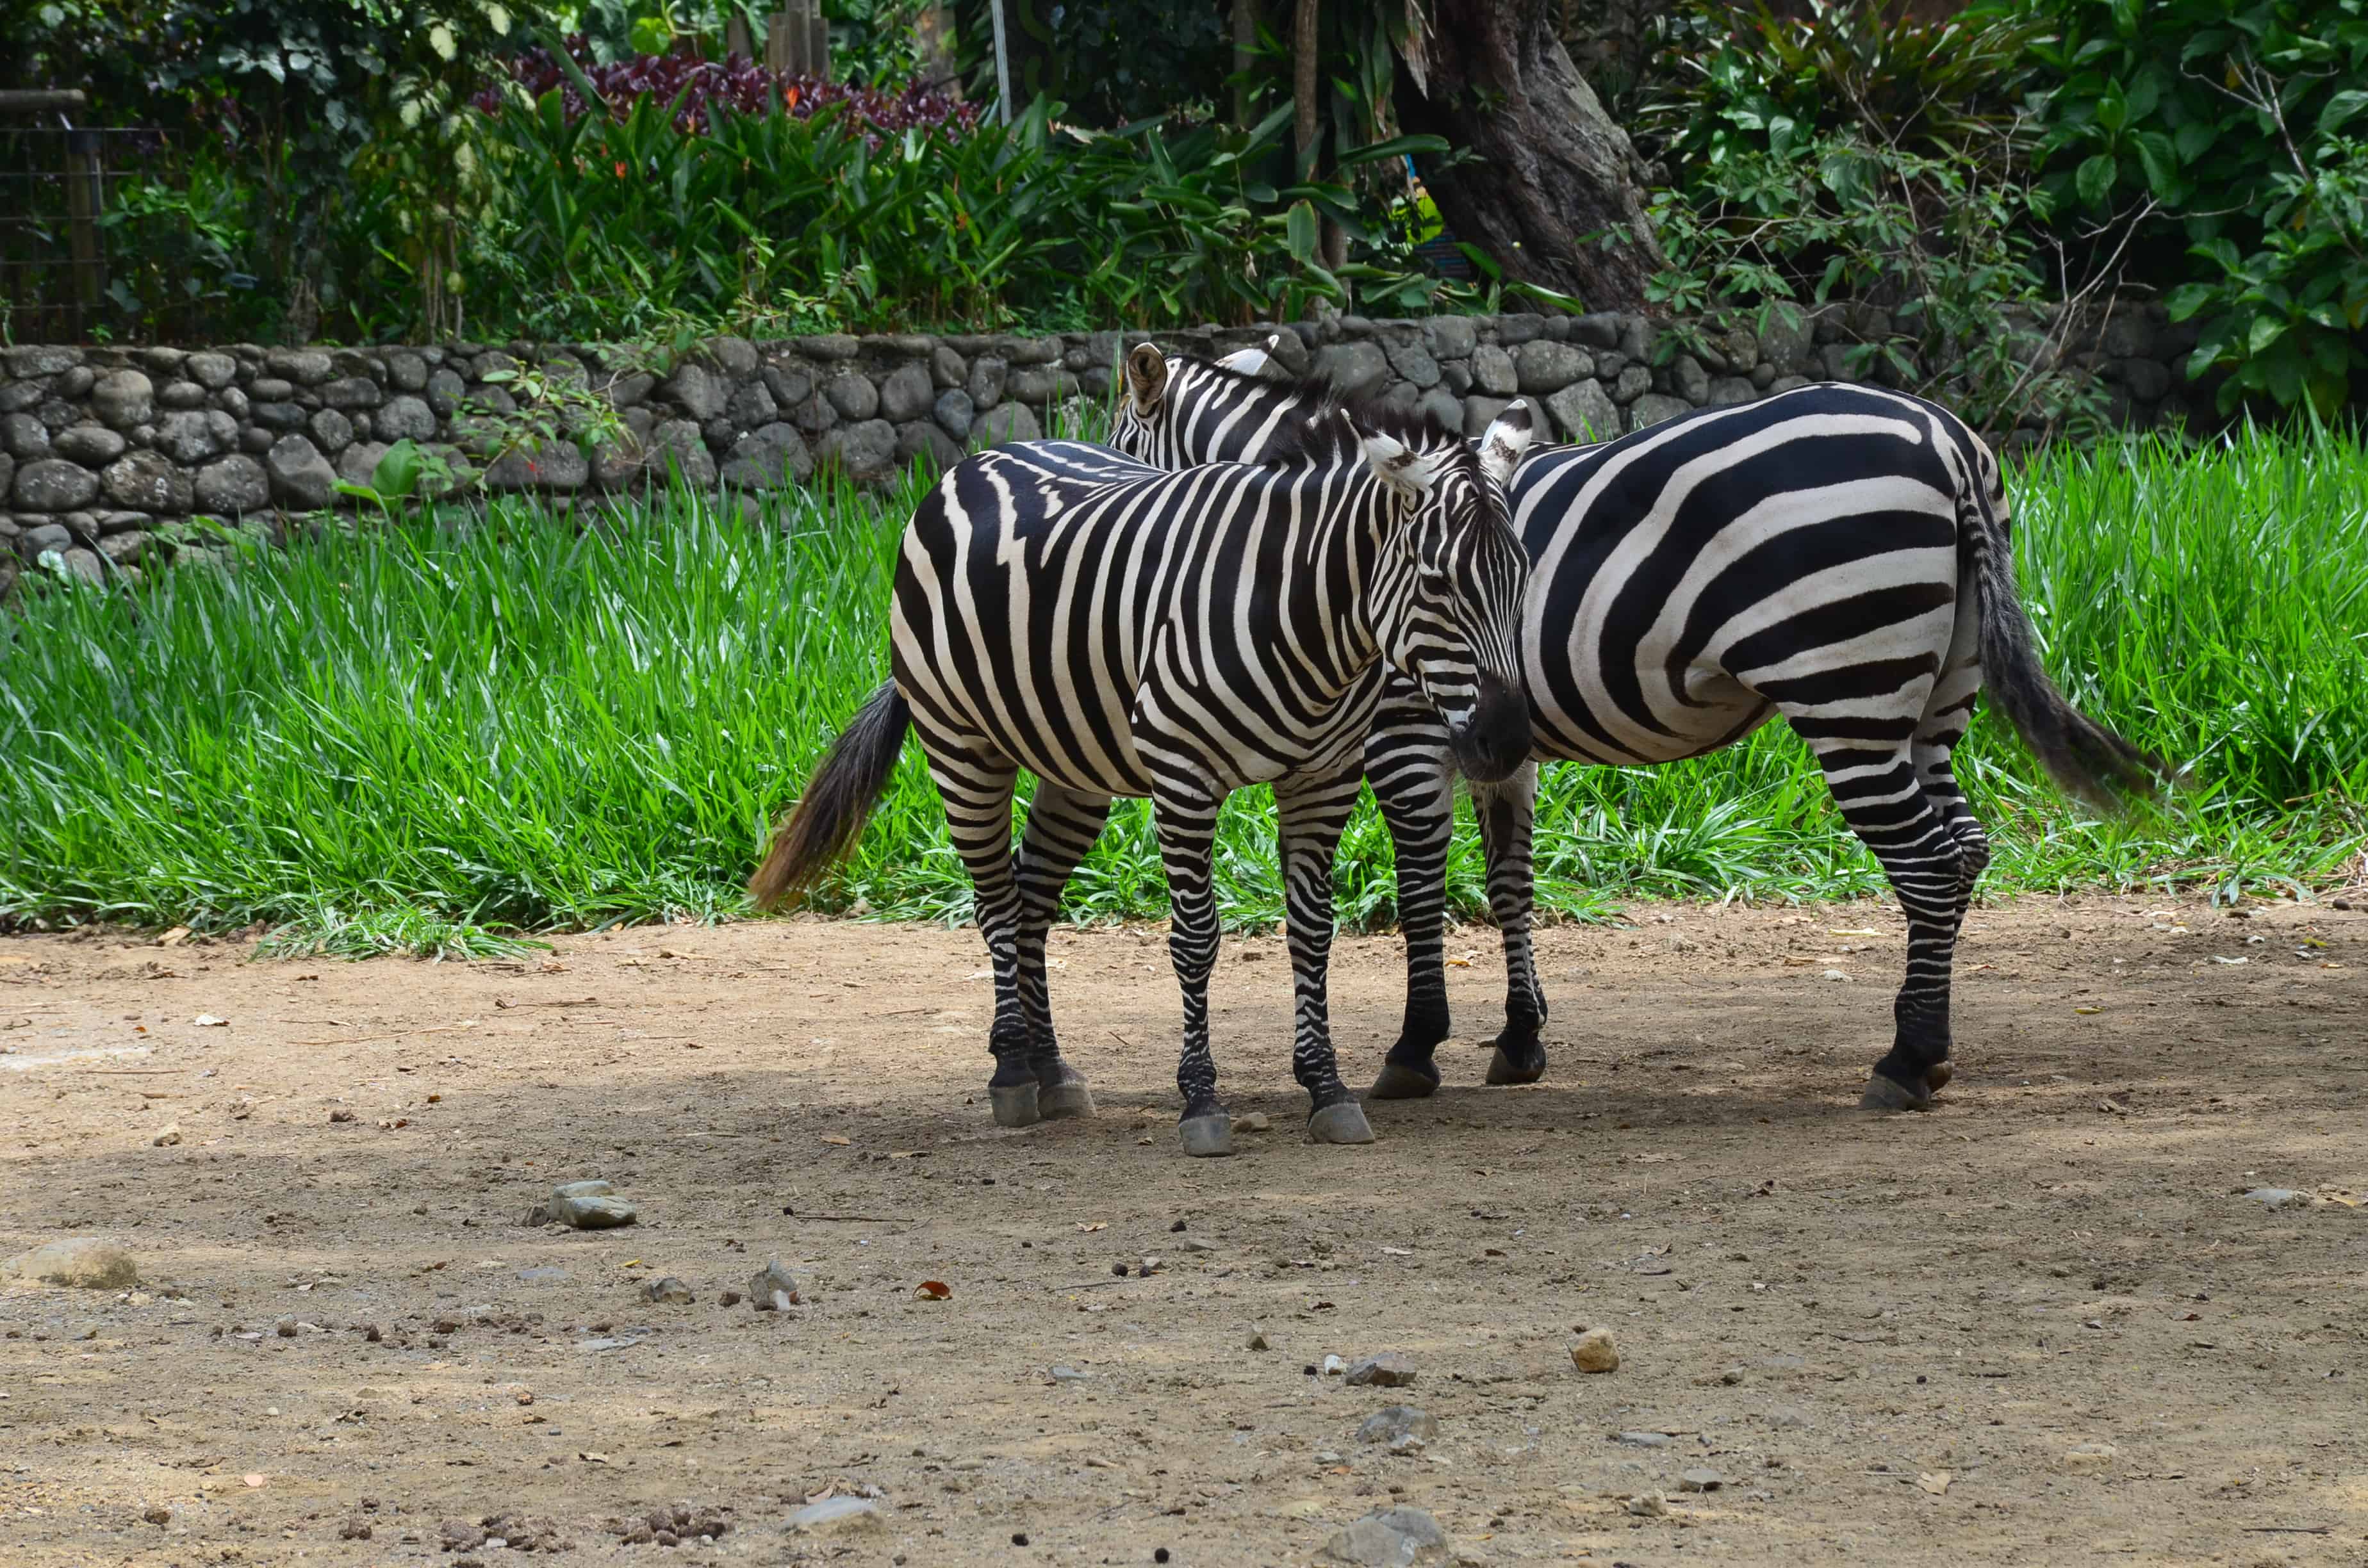 Zebras at the Cali Zoo in Colombia